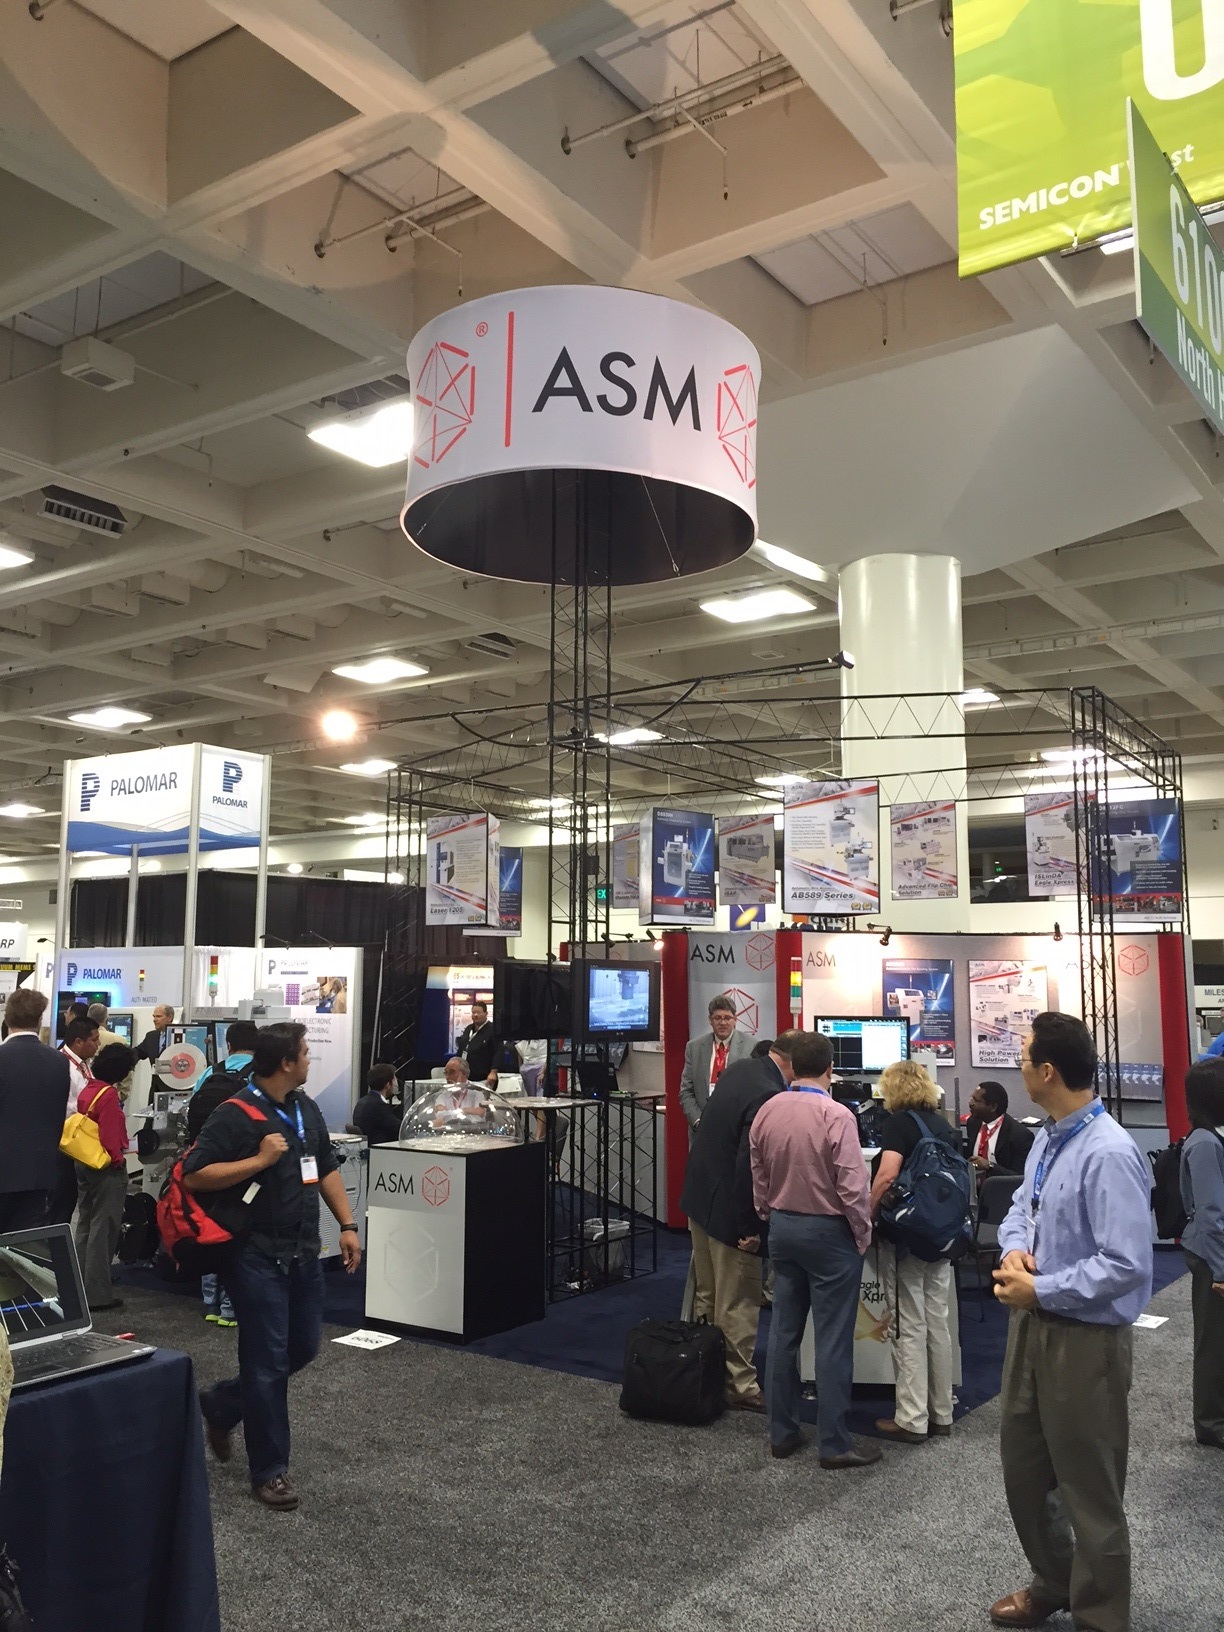 Semicon West 2015